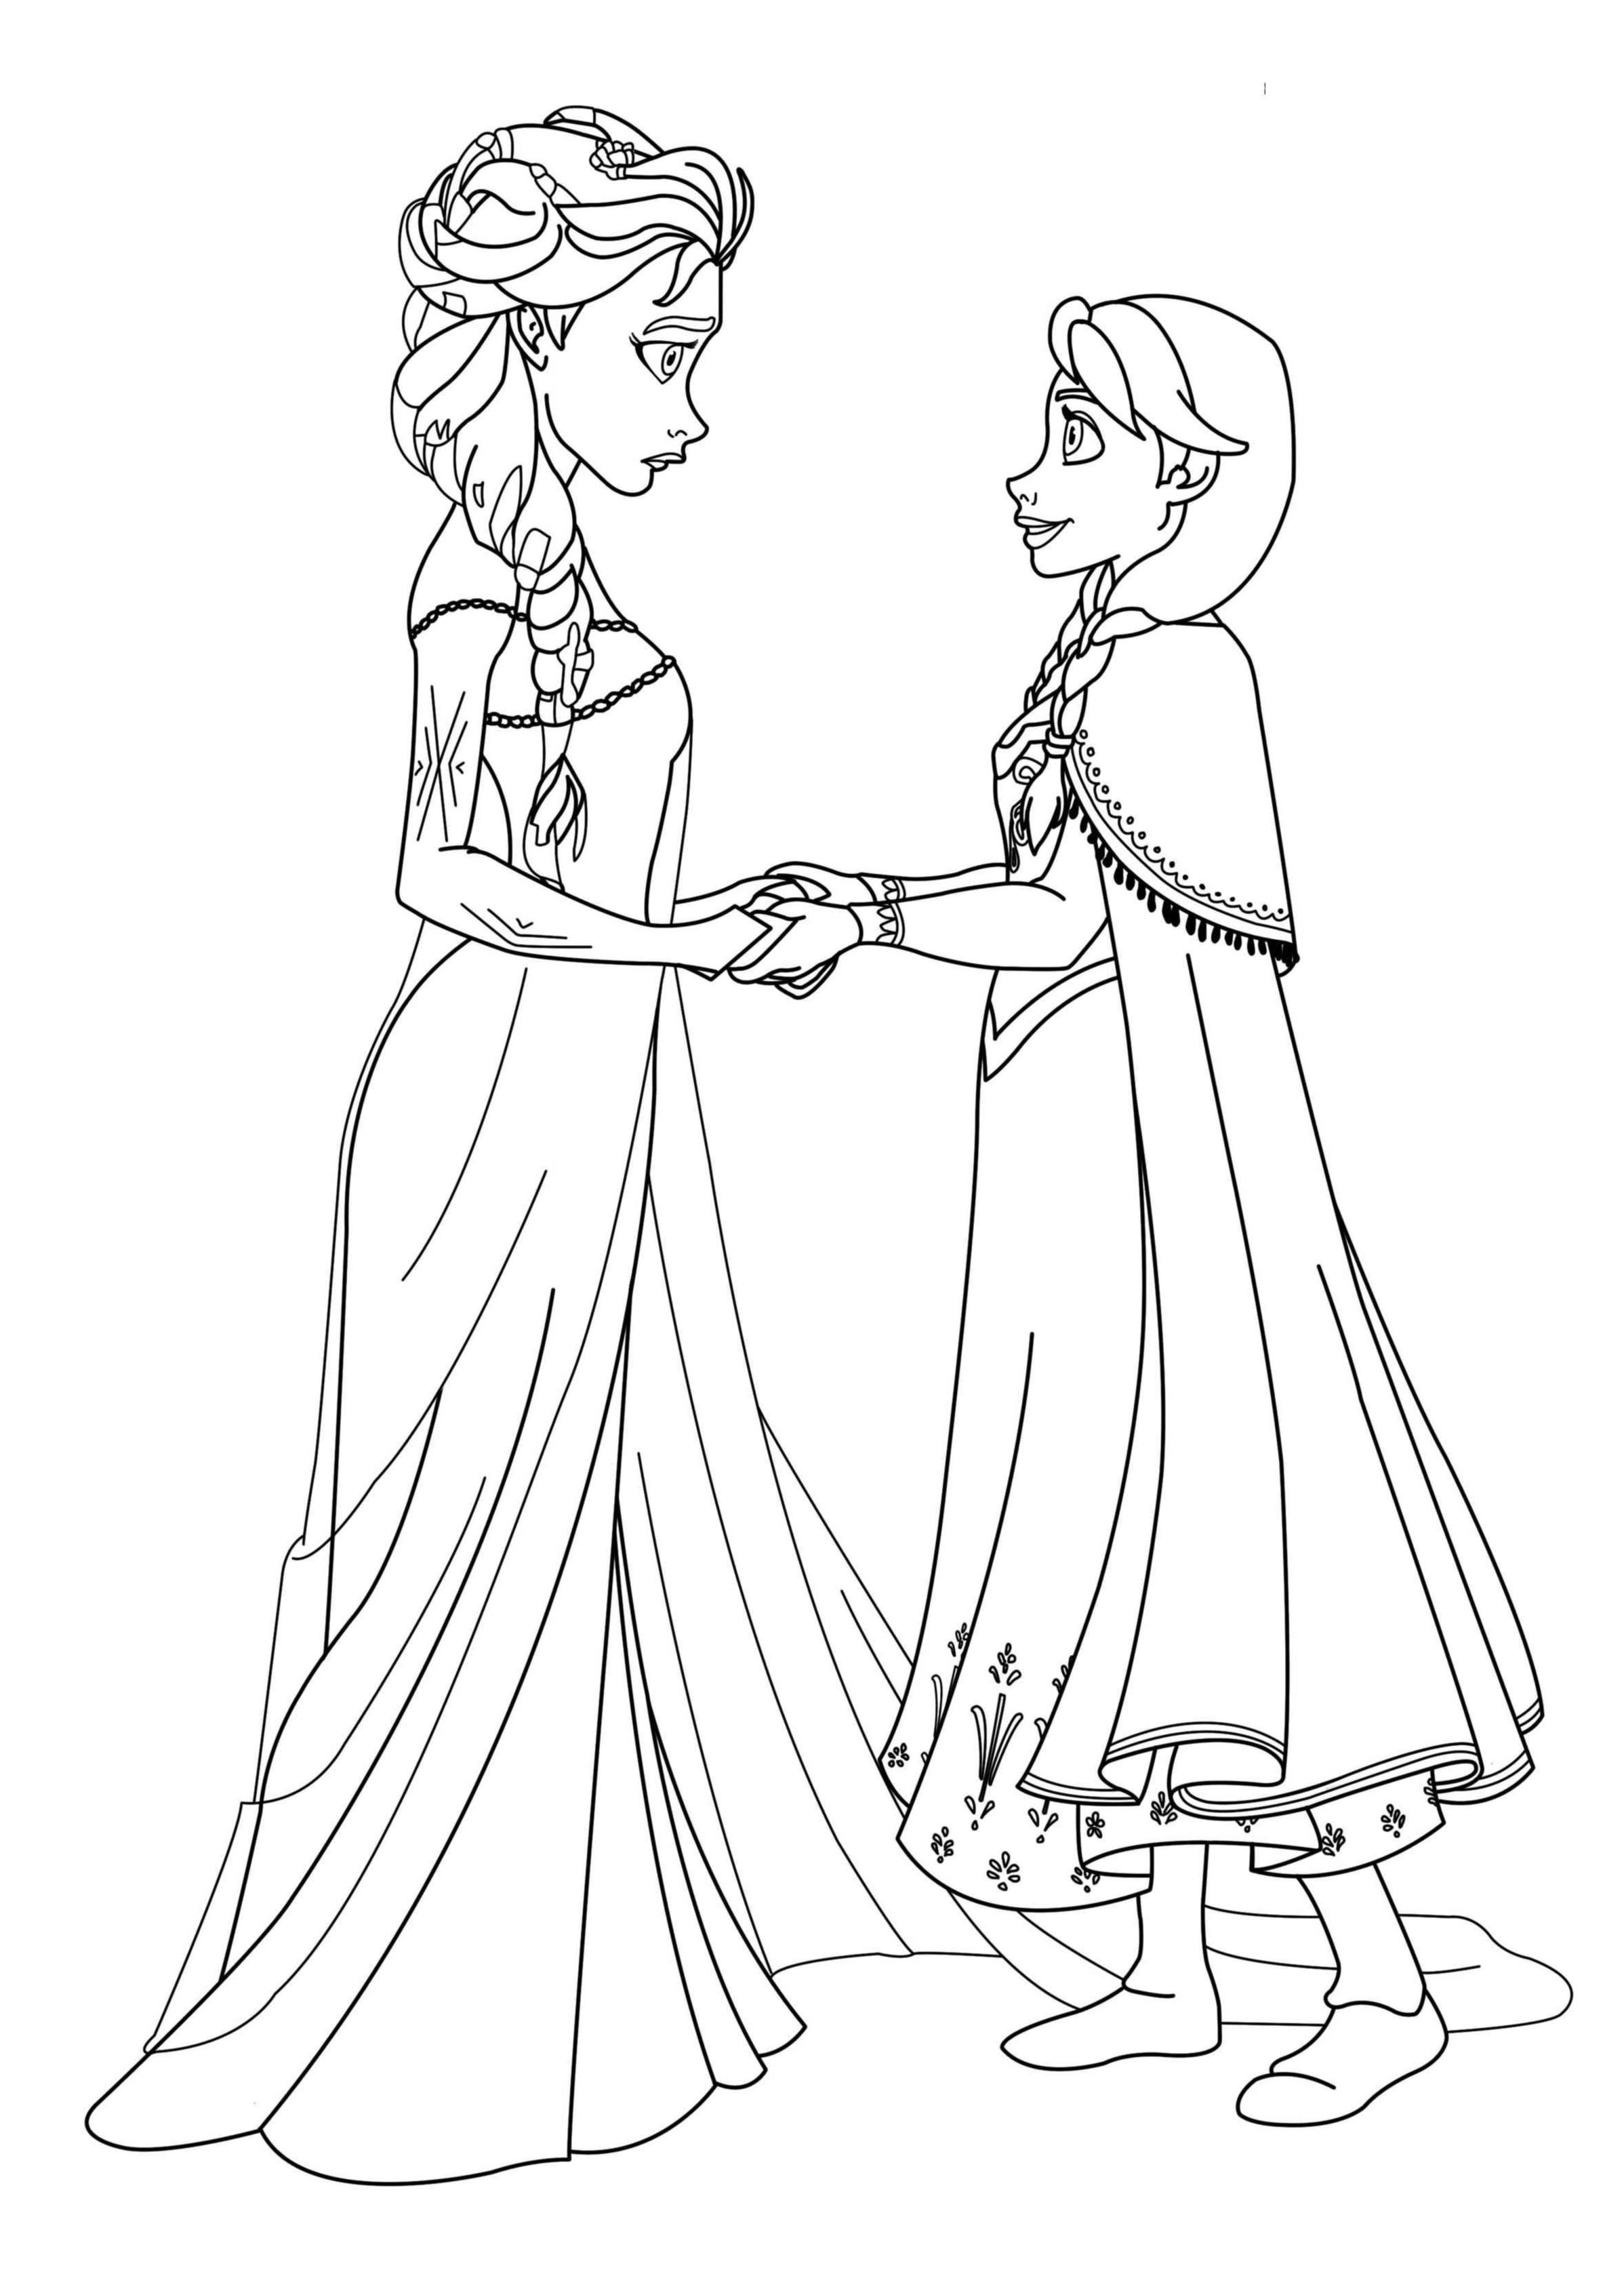 Frozen Characters Coloring Pages - Frozen Kids Coloring Pages